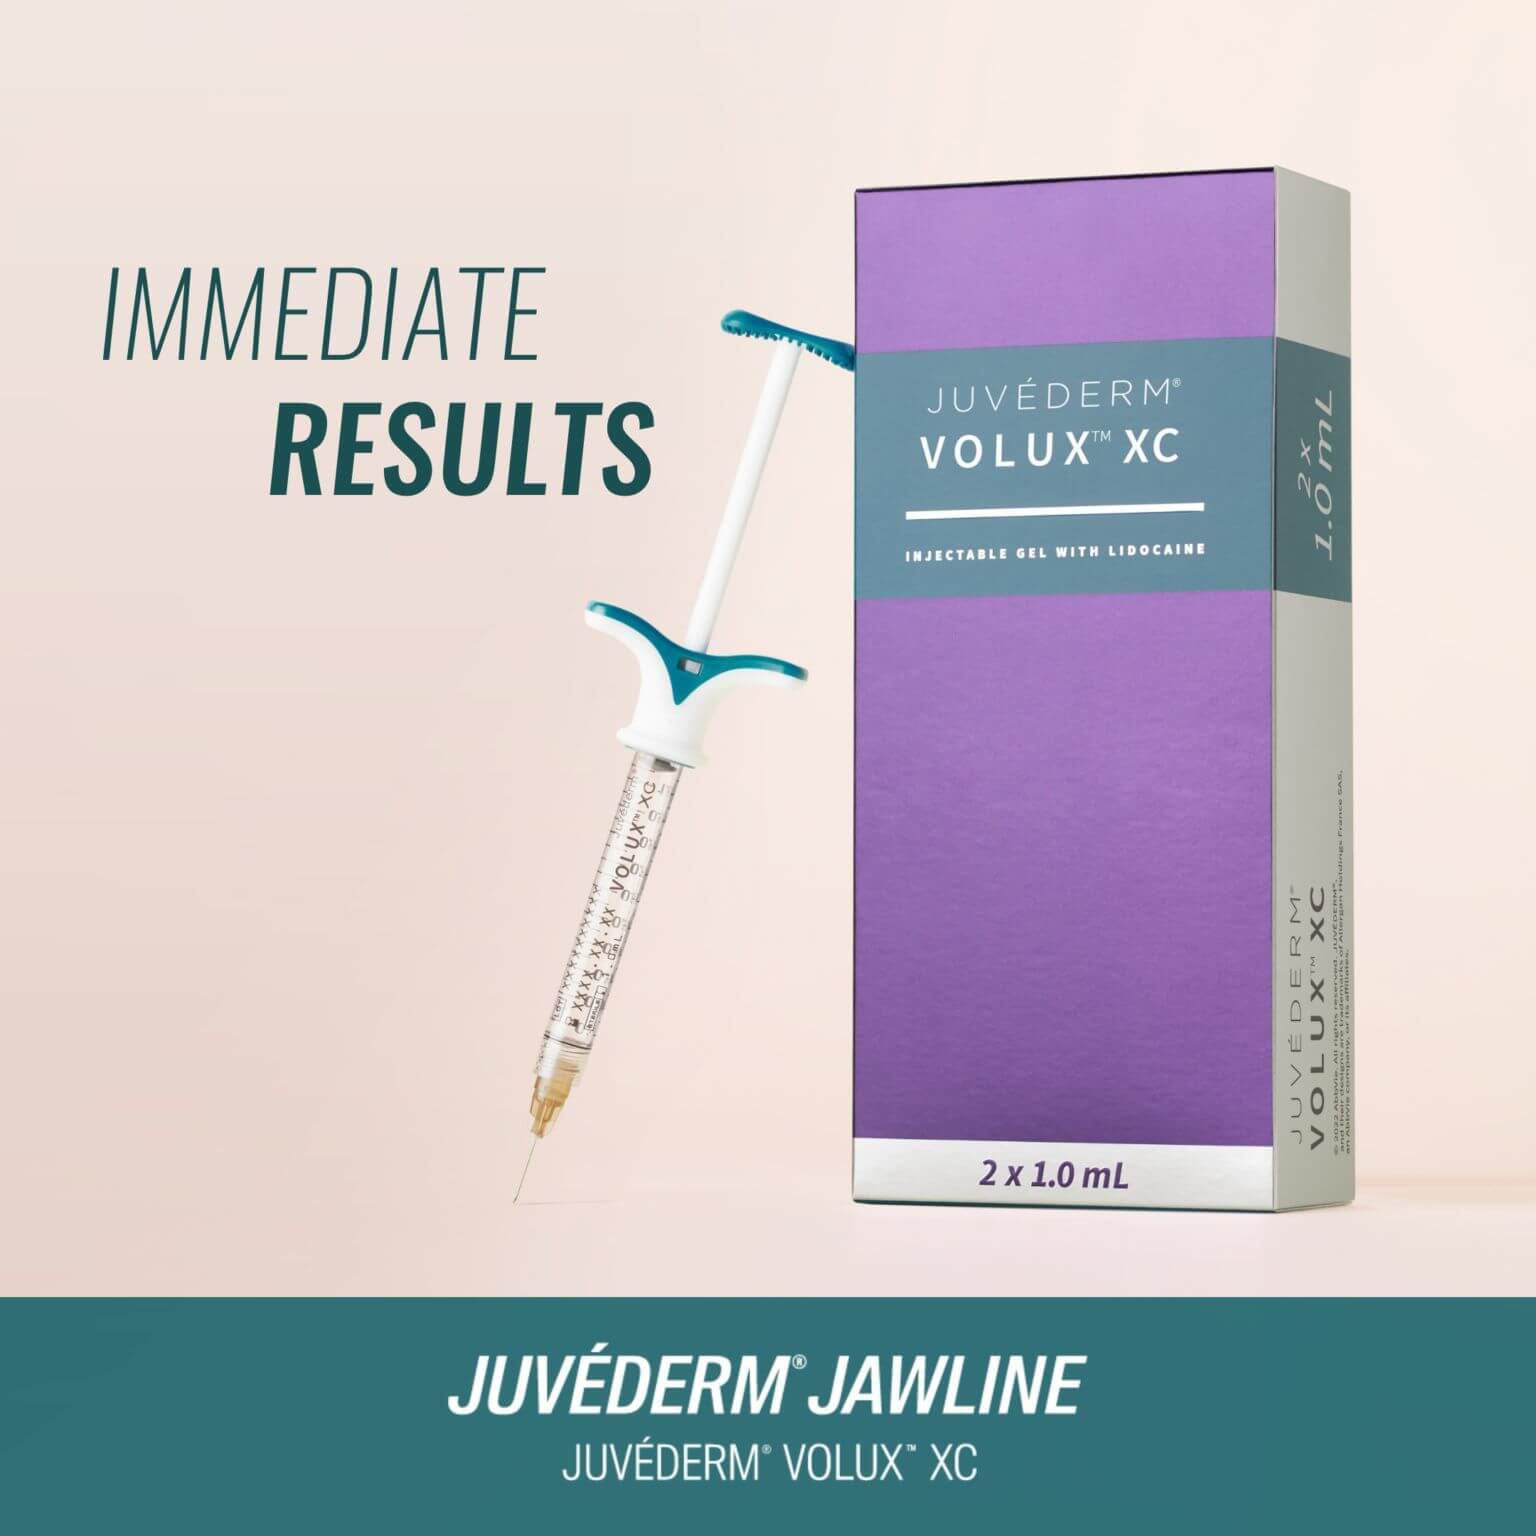 Promotional flier for Juvéderm® Volux XC injectable